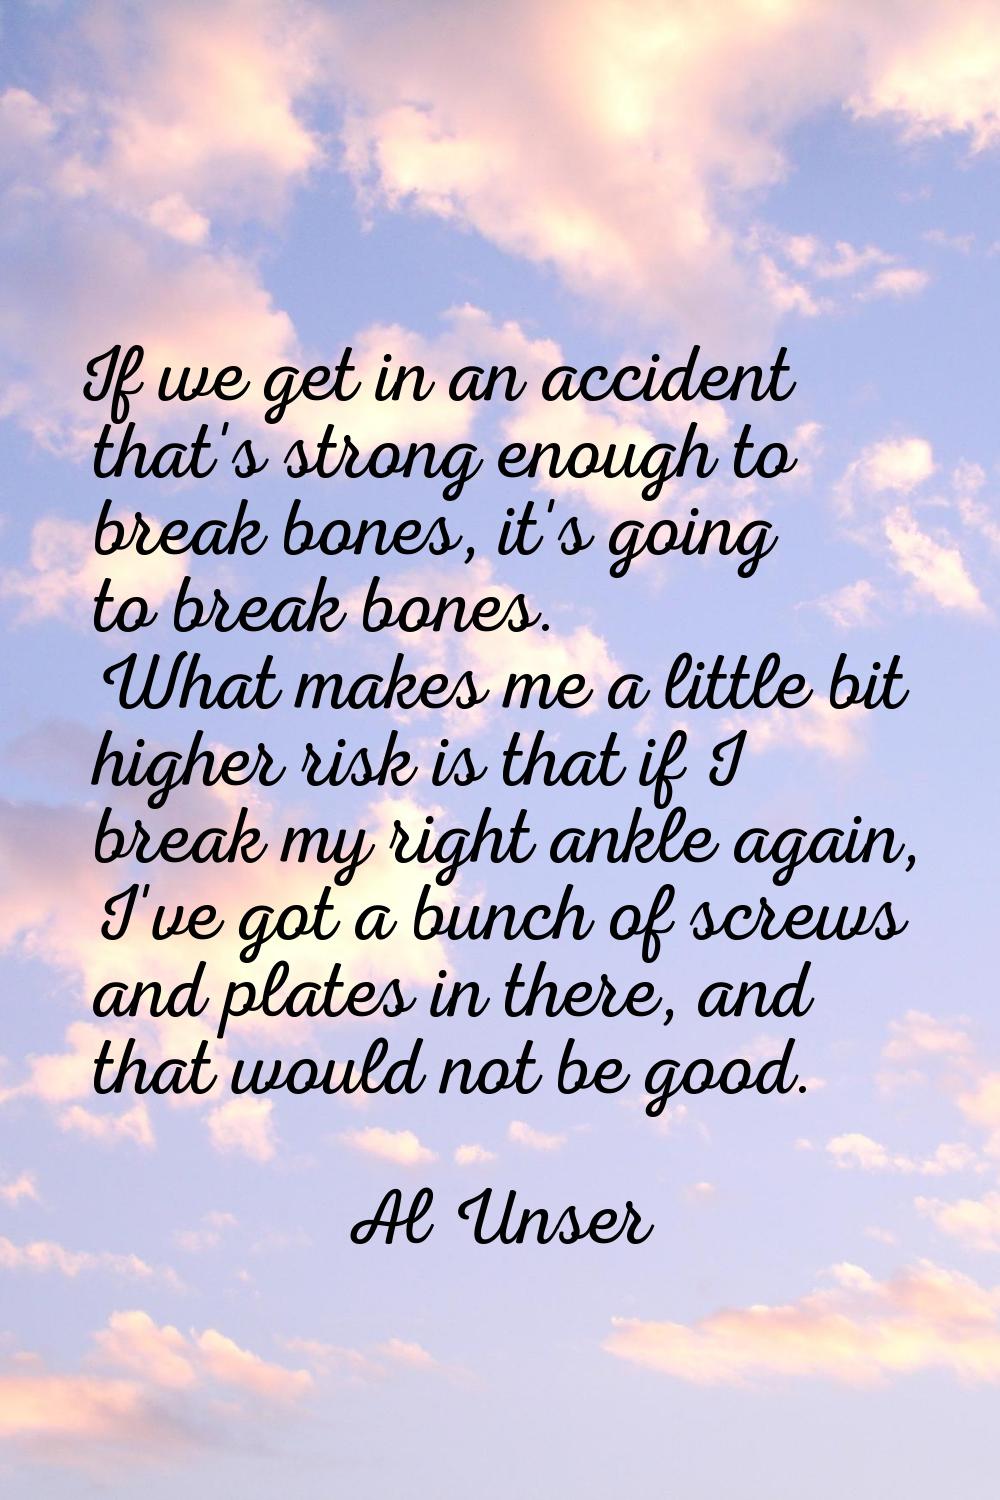 If we get in an accident that's strong enough to break bones, it's going to break bones. What makes